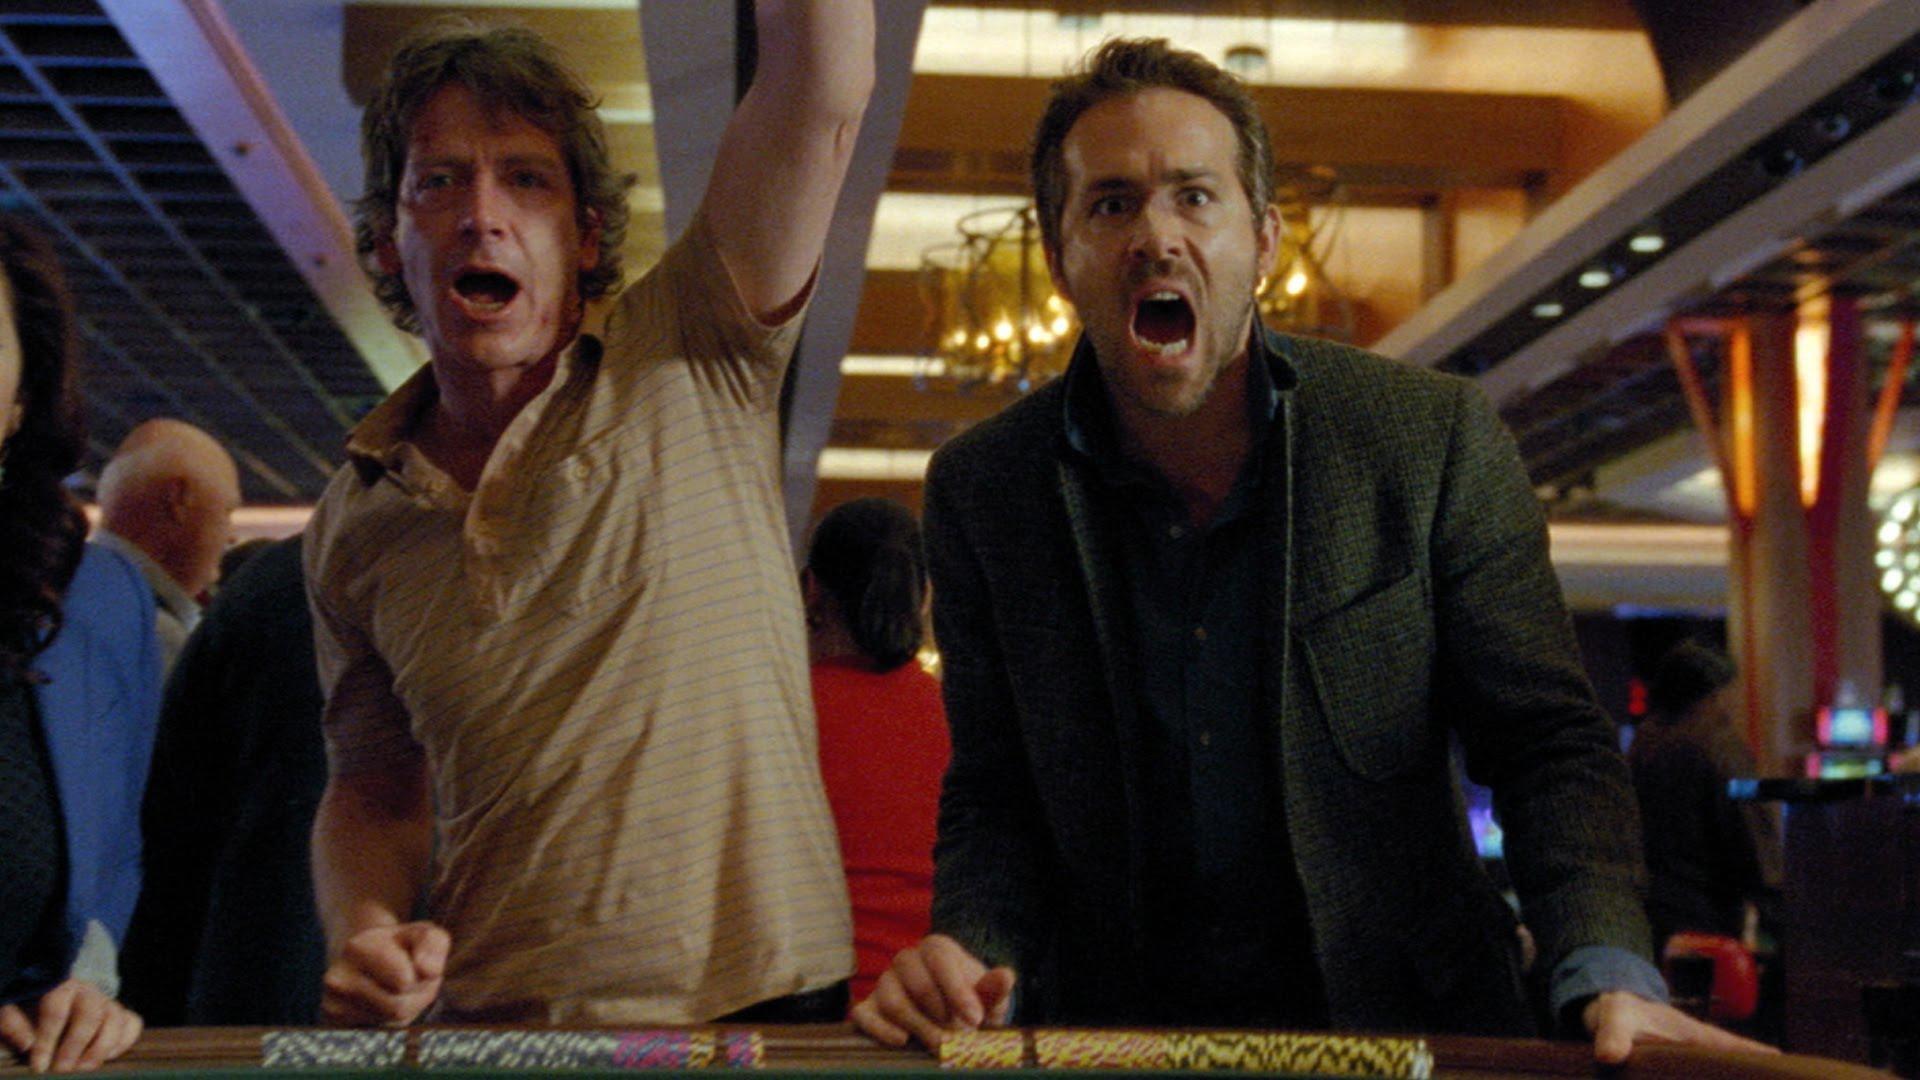 Mississippi Grind Used Real-Life New Orleans Poker Players To Add Authenticity, Film-Makers Reveal